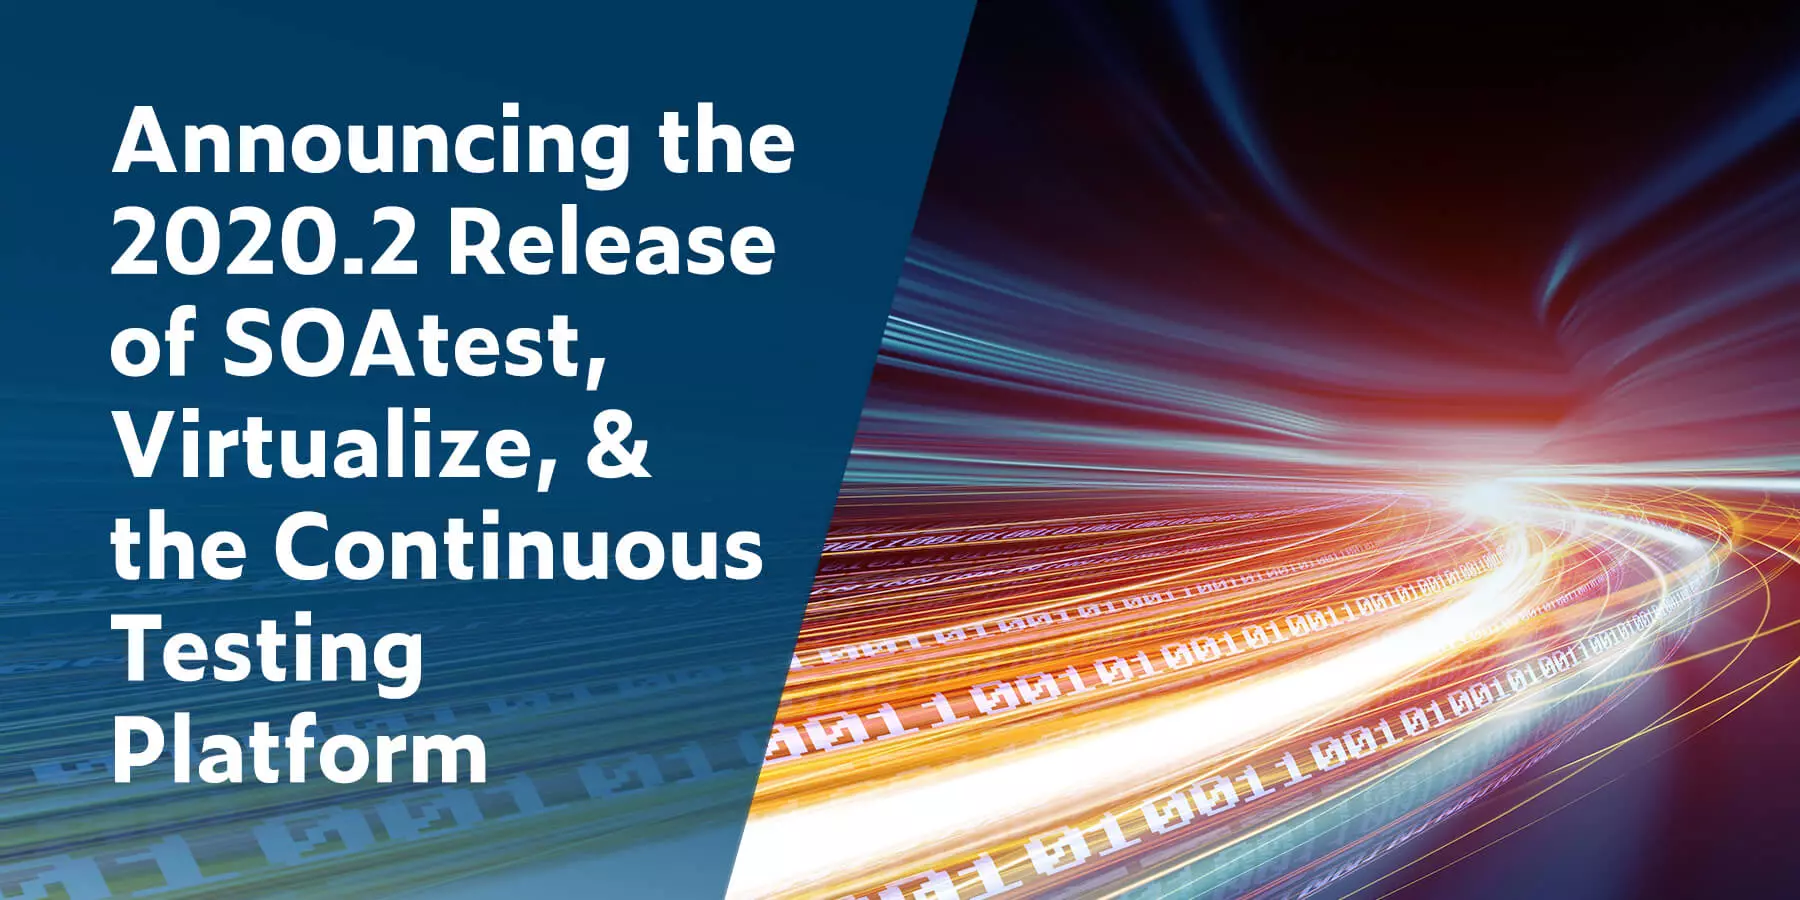 Announcing the 2020.2 Release of SOAtest, Virtualize, & the Continuous Testing Platform